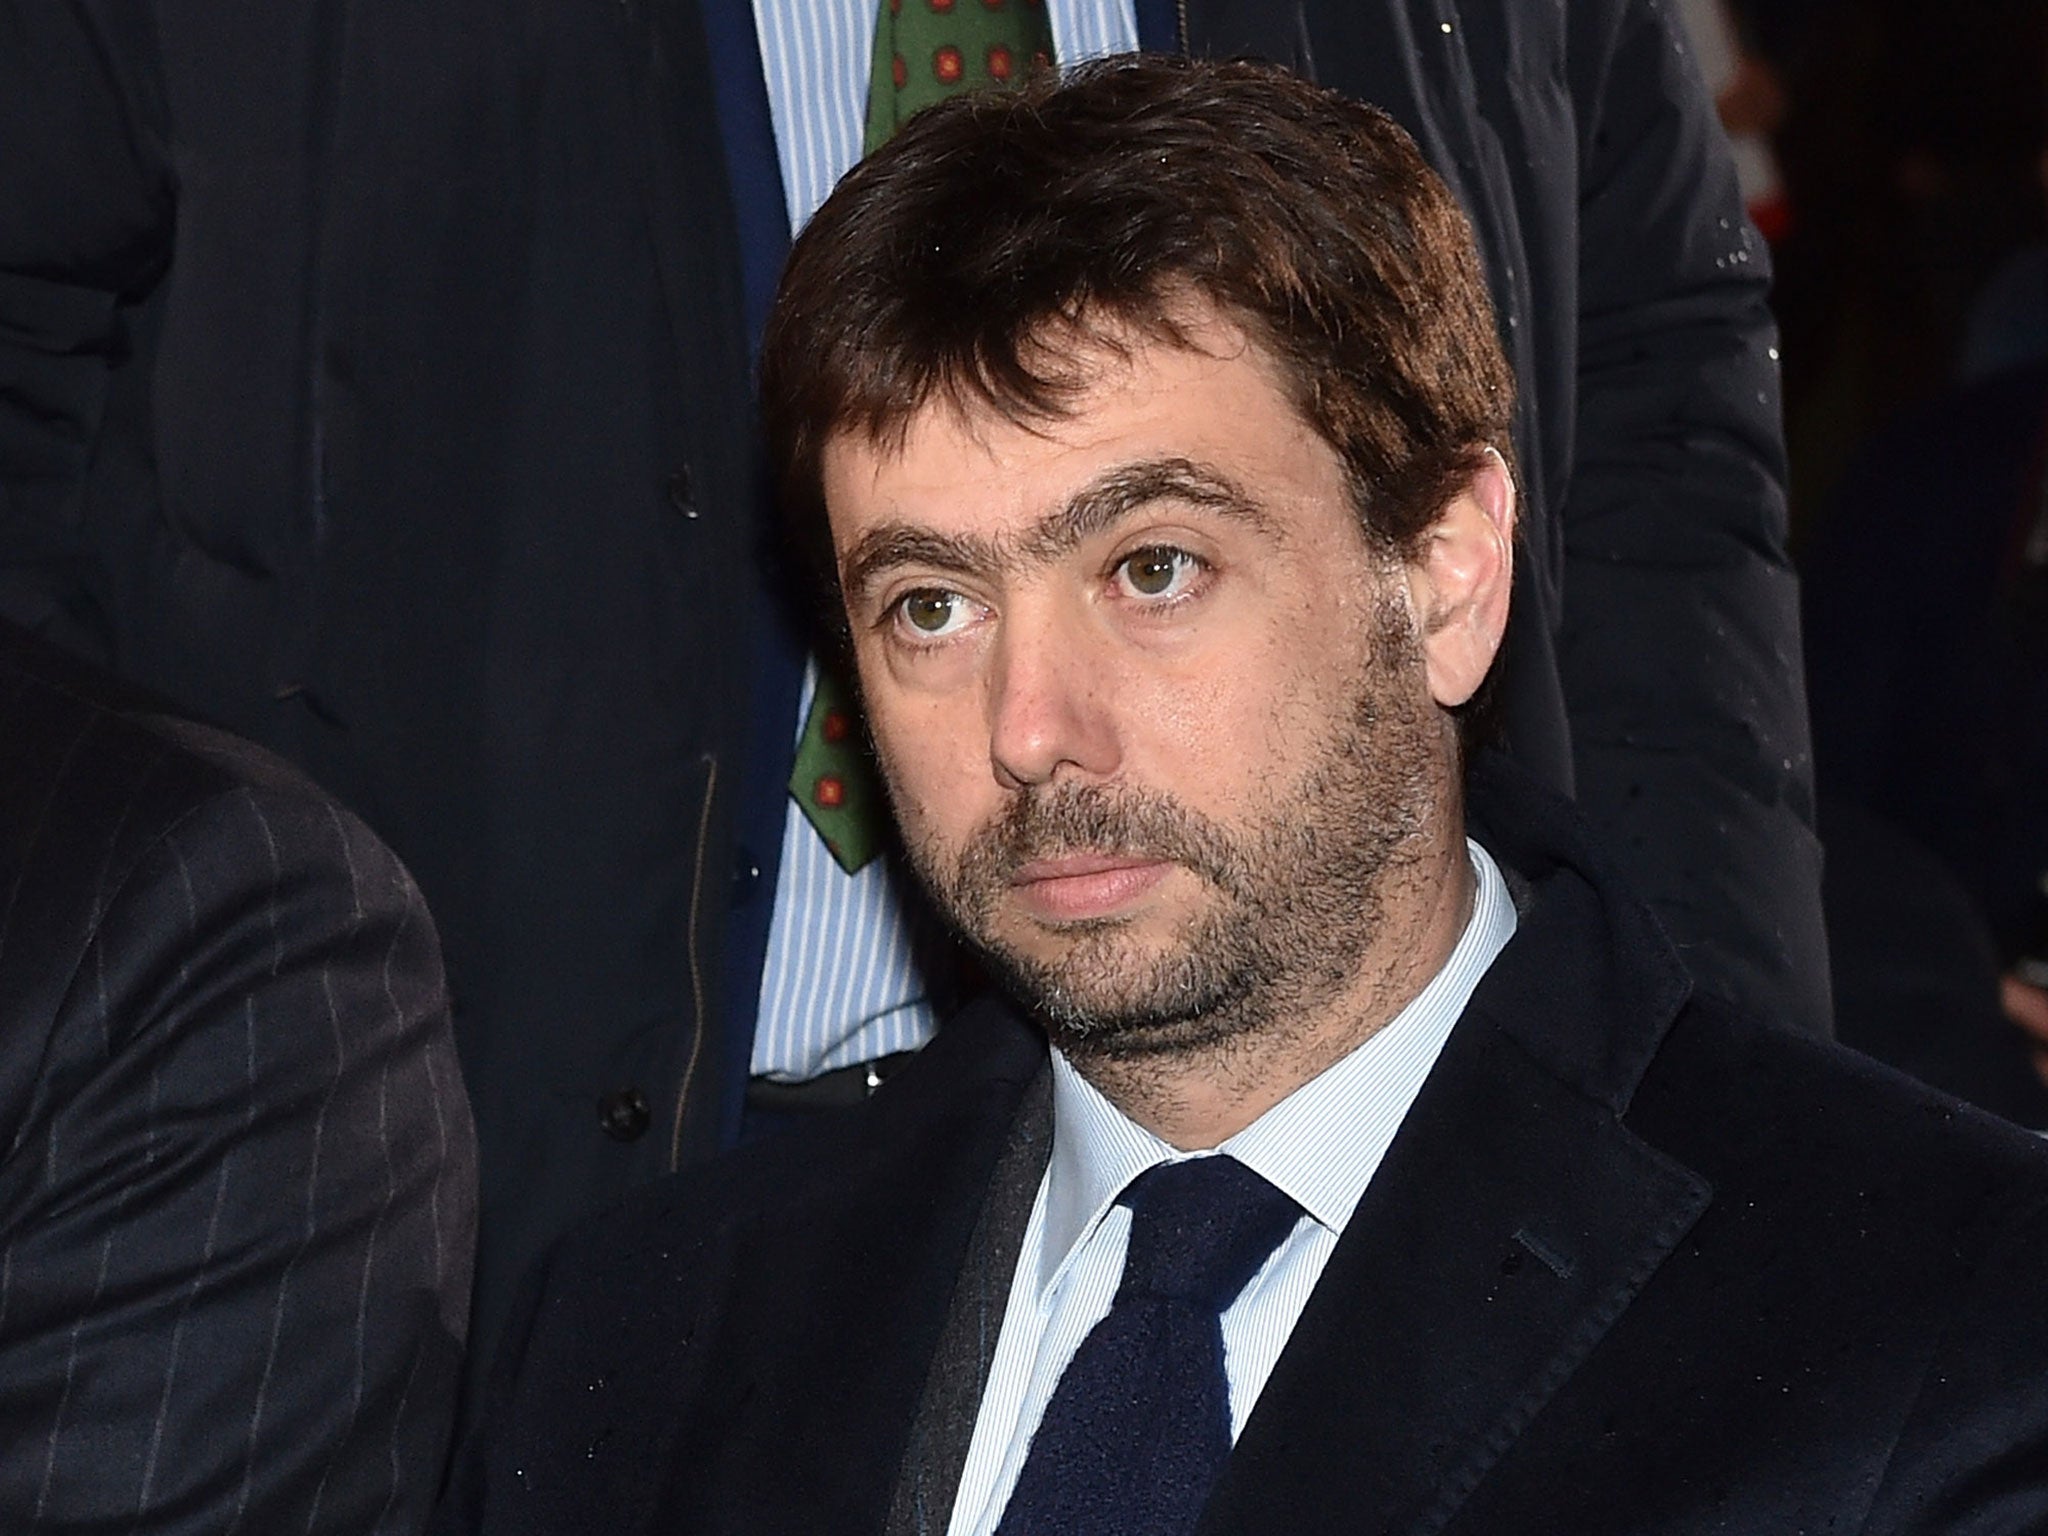 Juve’s president, Andrea Agnelli, is driving the club forward